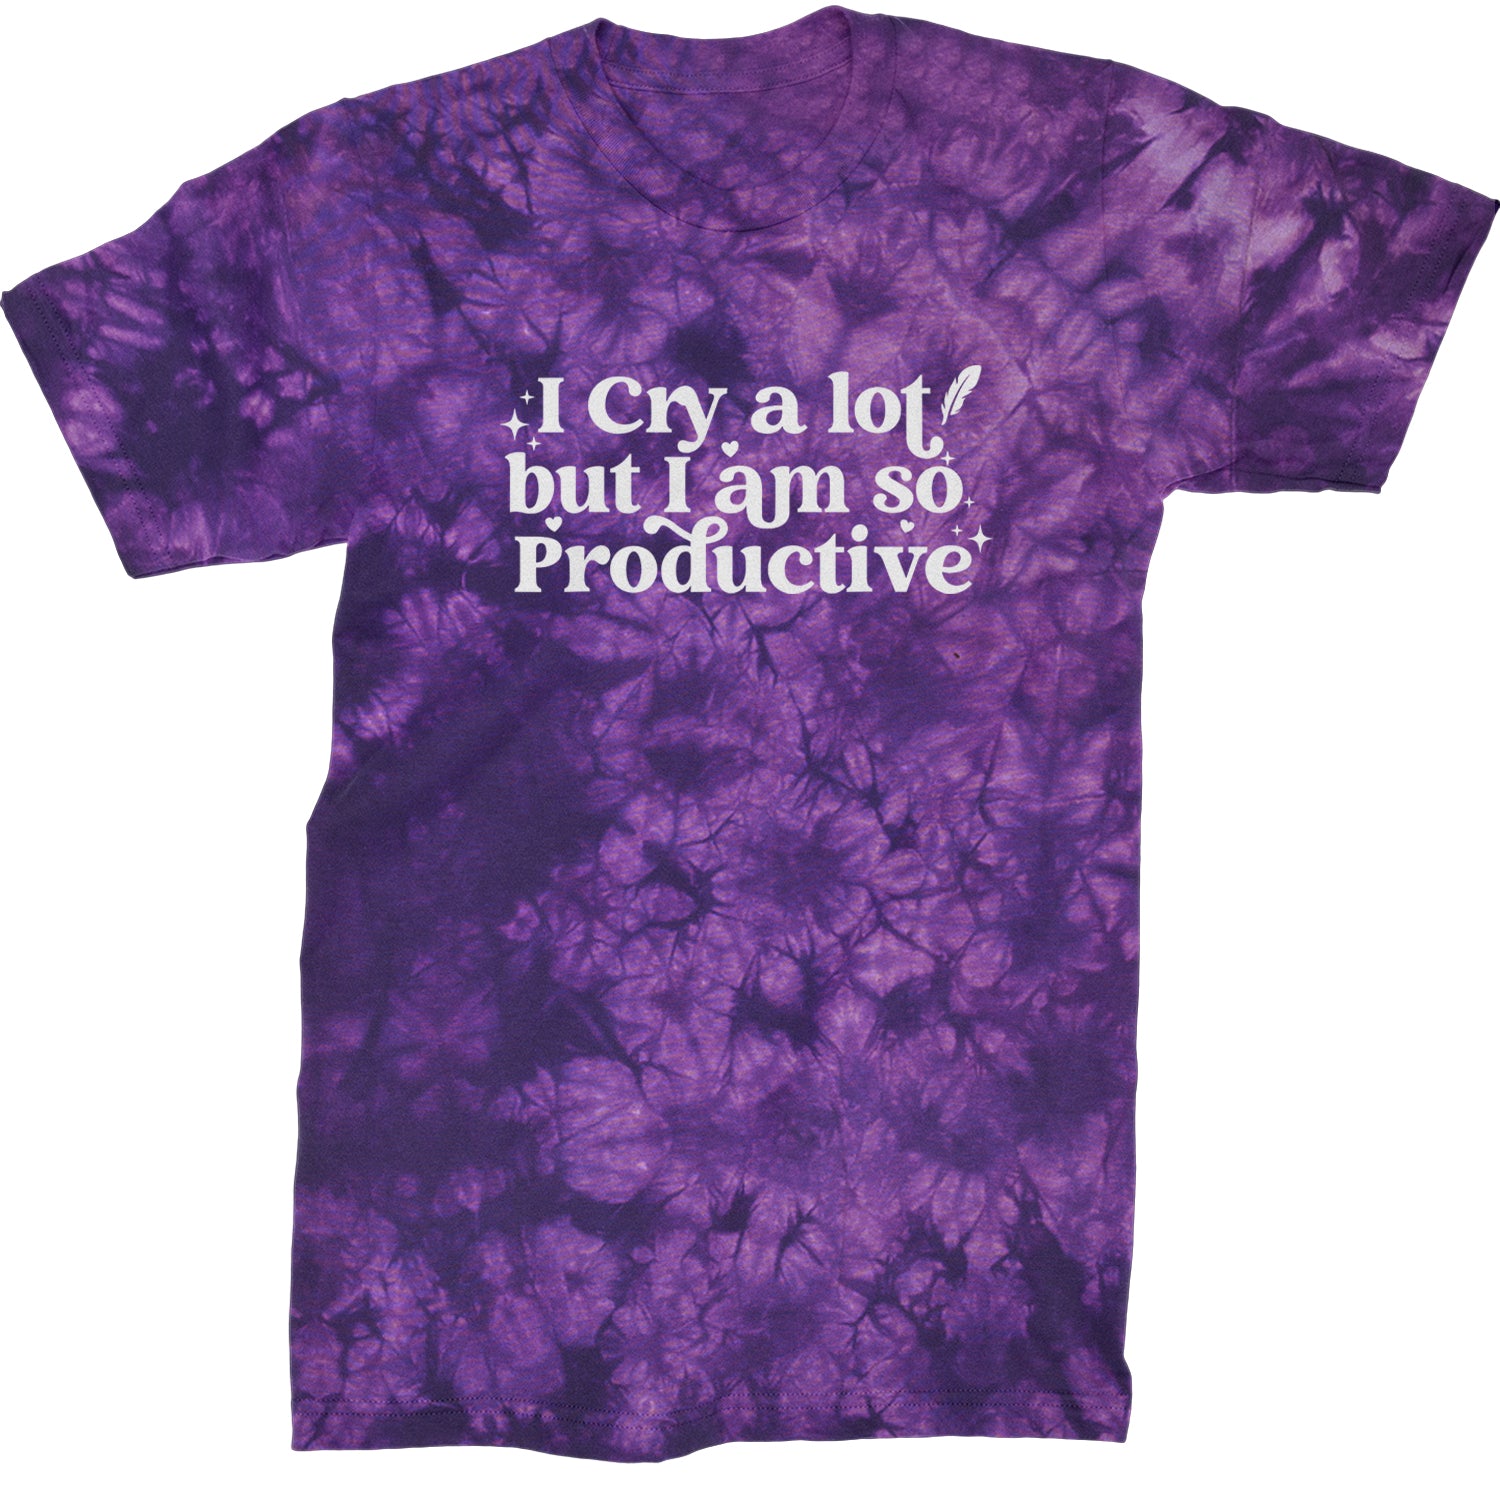 I Cry A Lot But I am So Productive TTPD Mens T-shirt Tie-Dye Crystal Purple